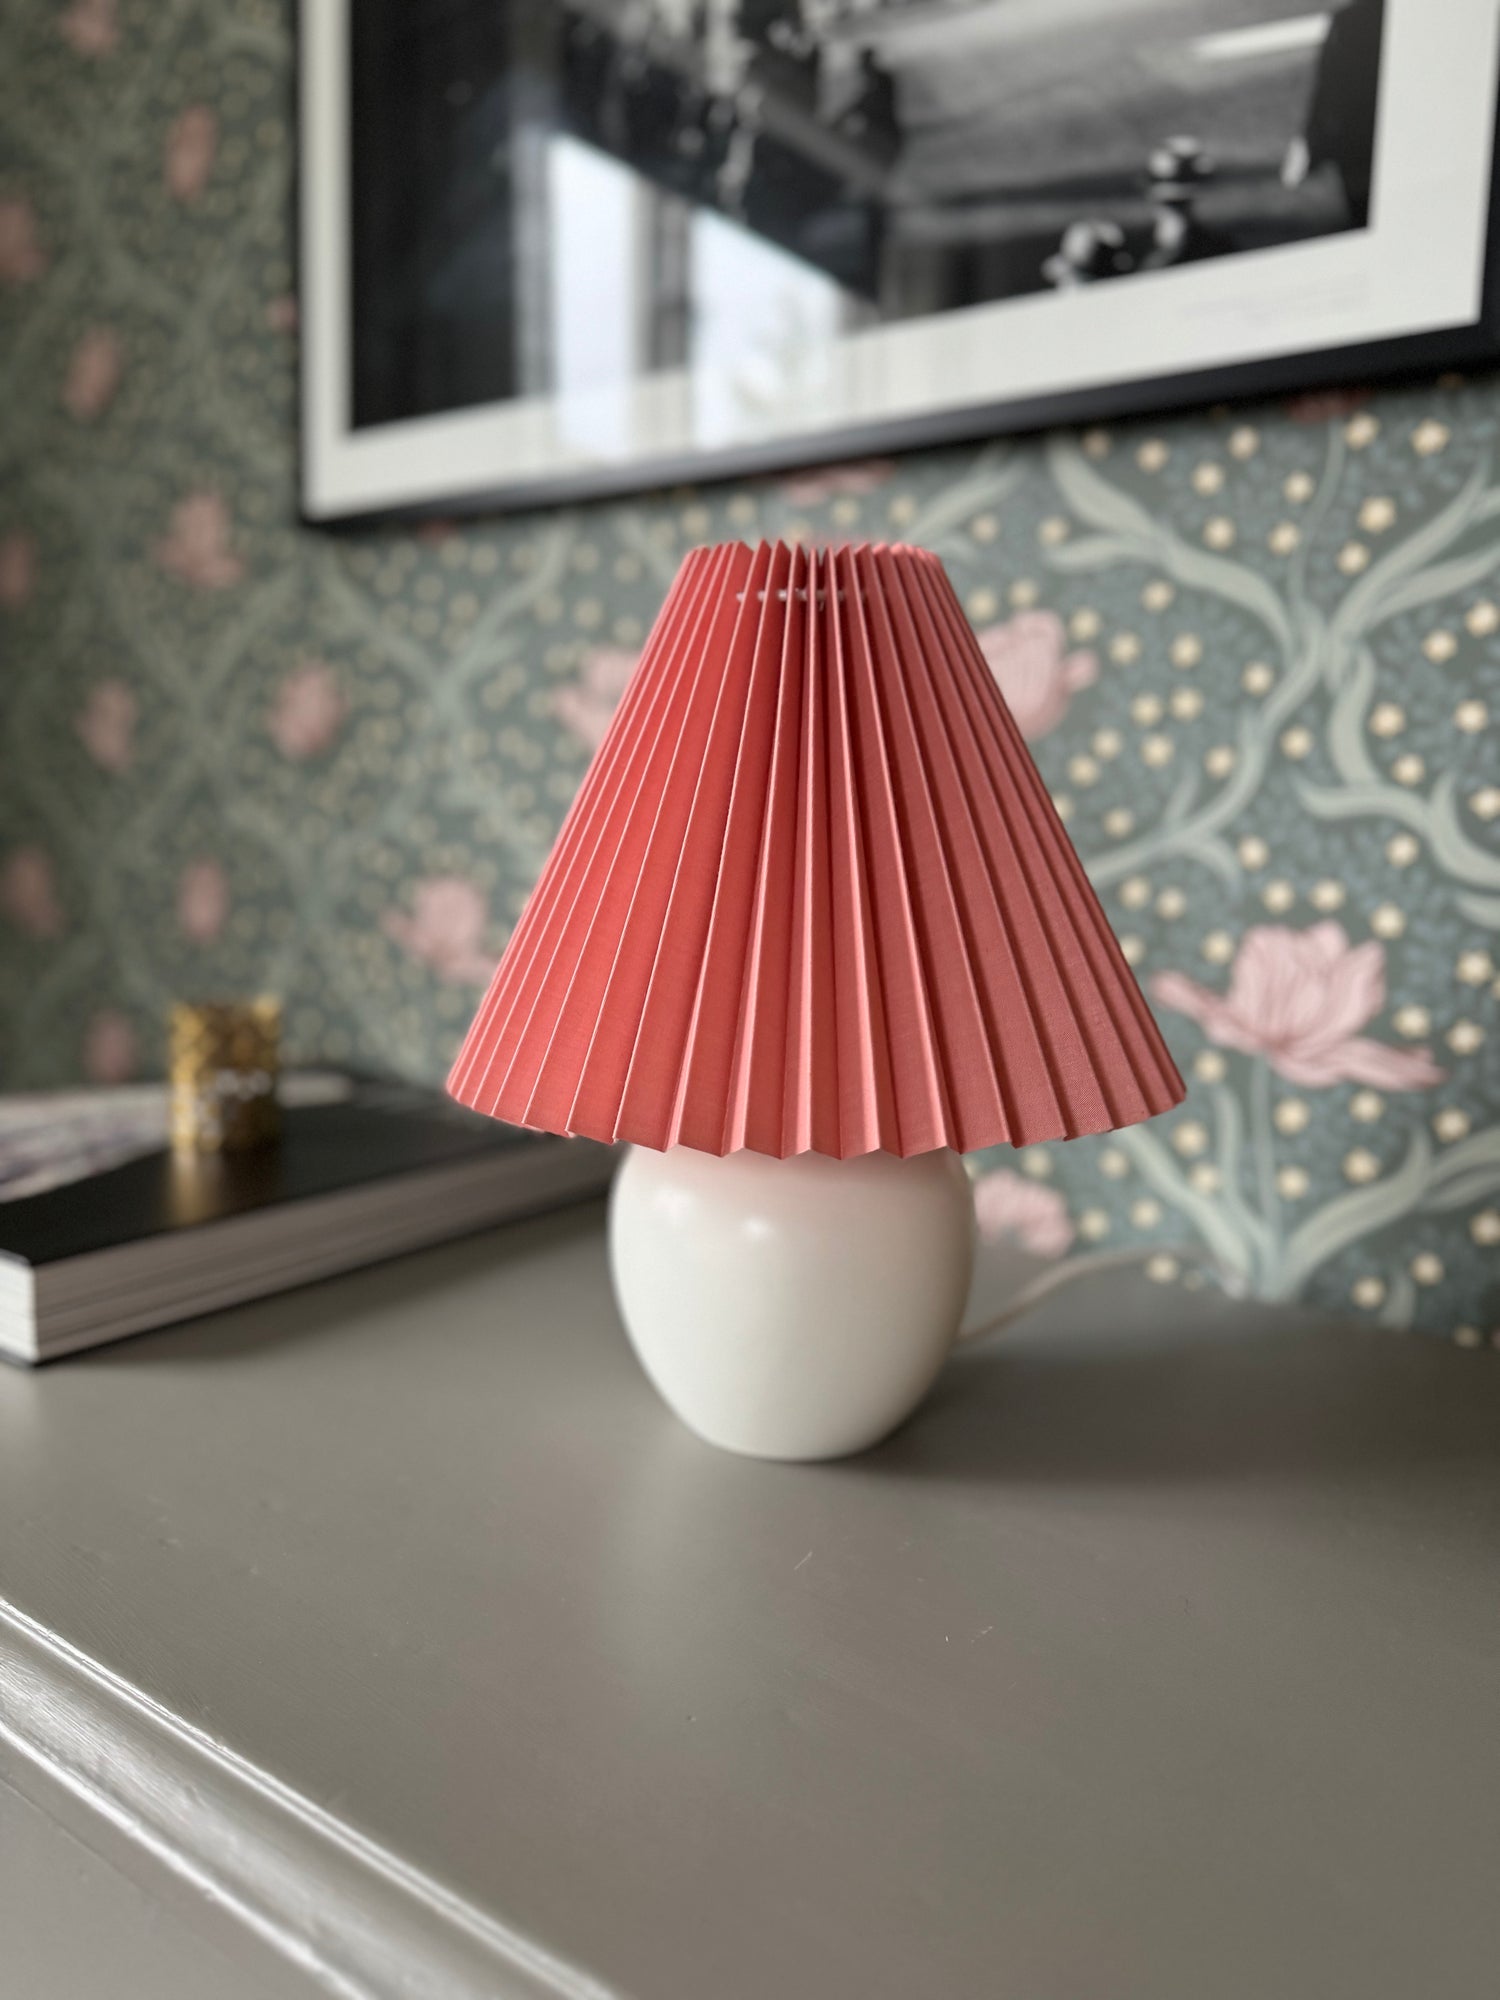 Pleated Lampshade - Pink - 23 cm